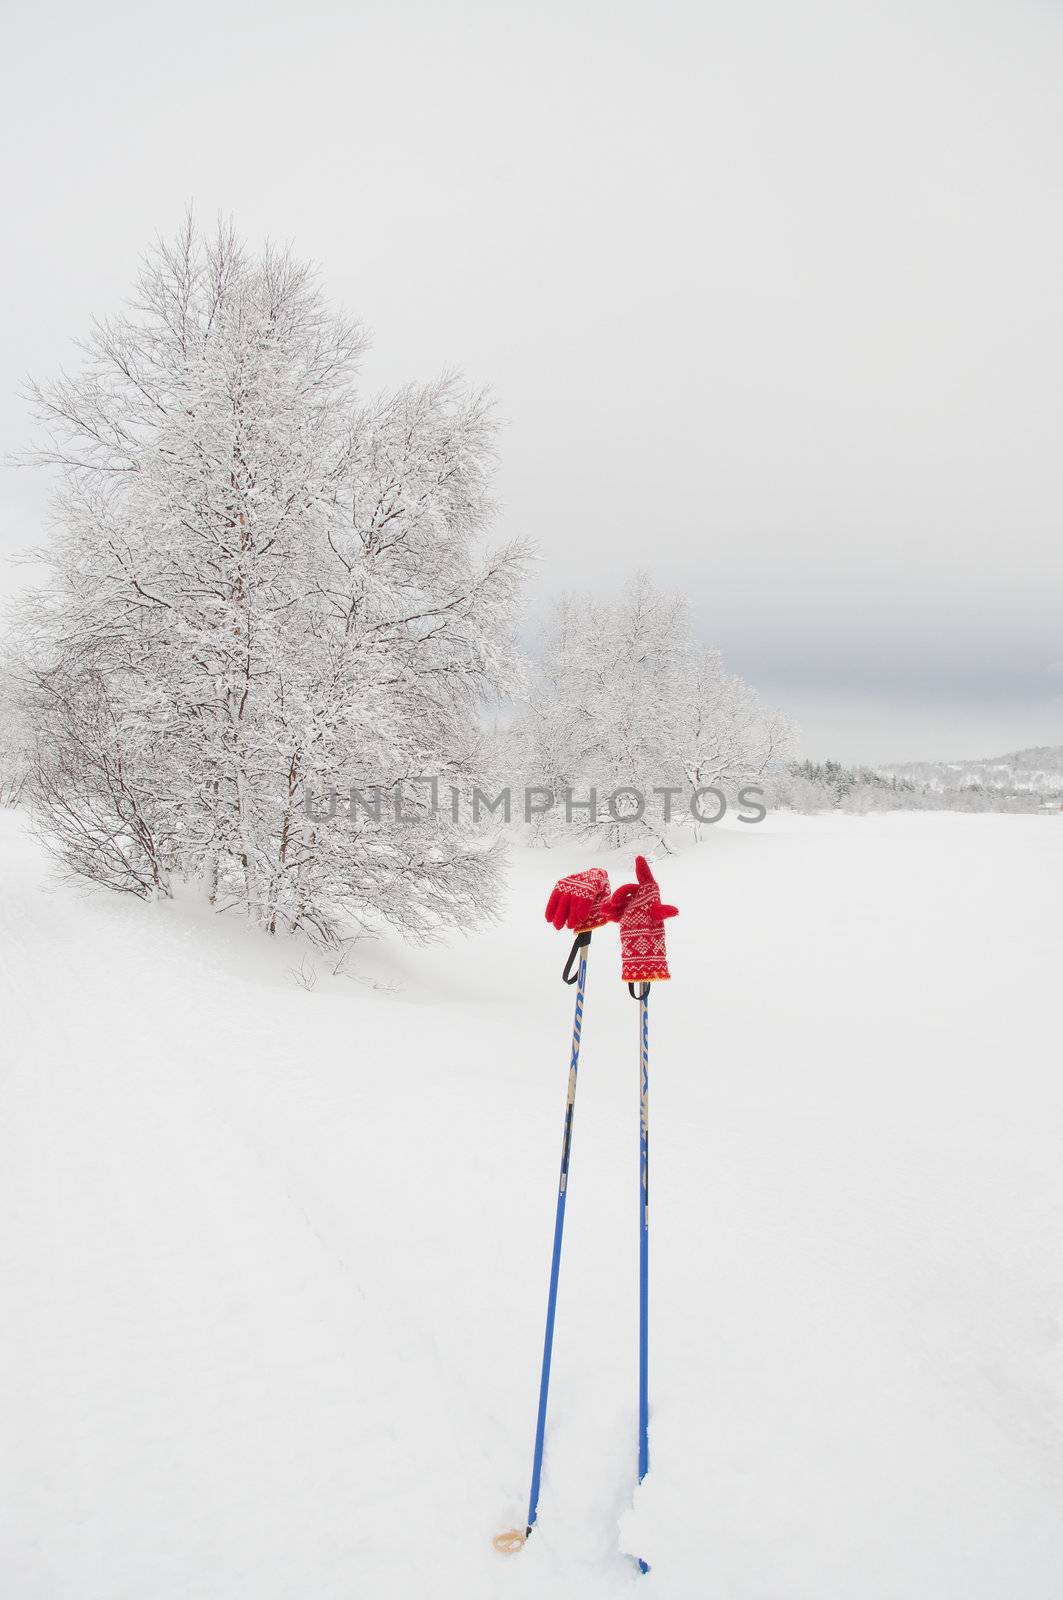 Ski poles and red gloves by GryT